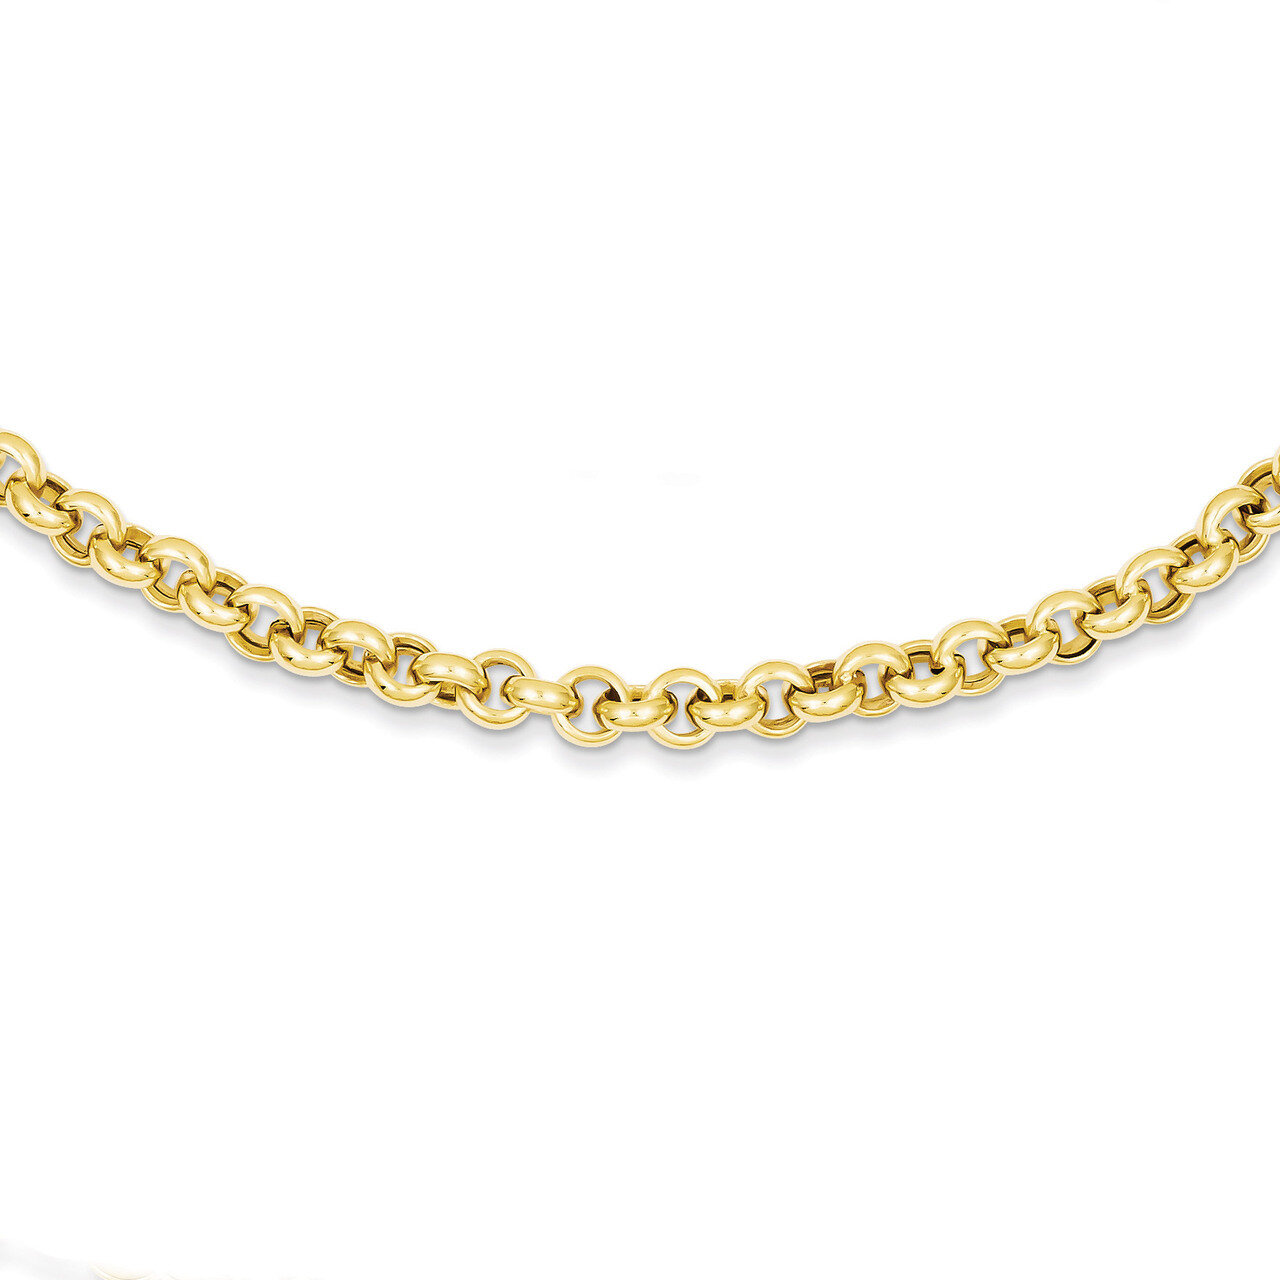 5mm Polished Fancy Rolo Link Necklace 18 Inch 14k Gold SF417-18